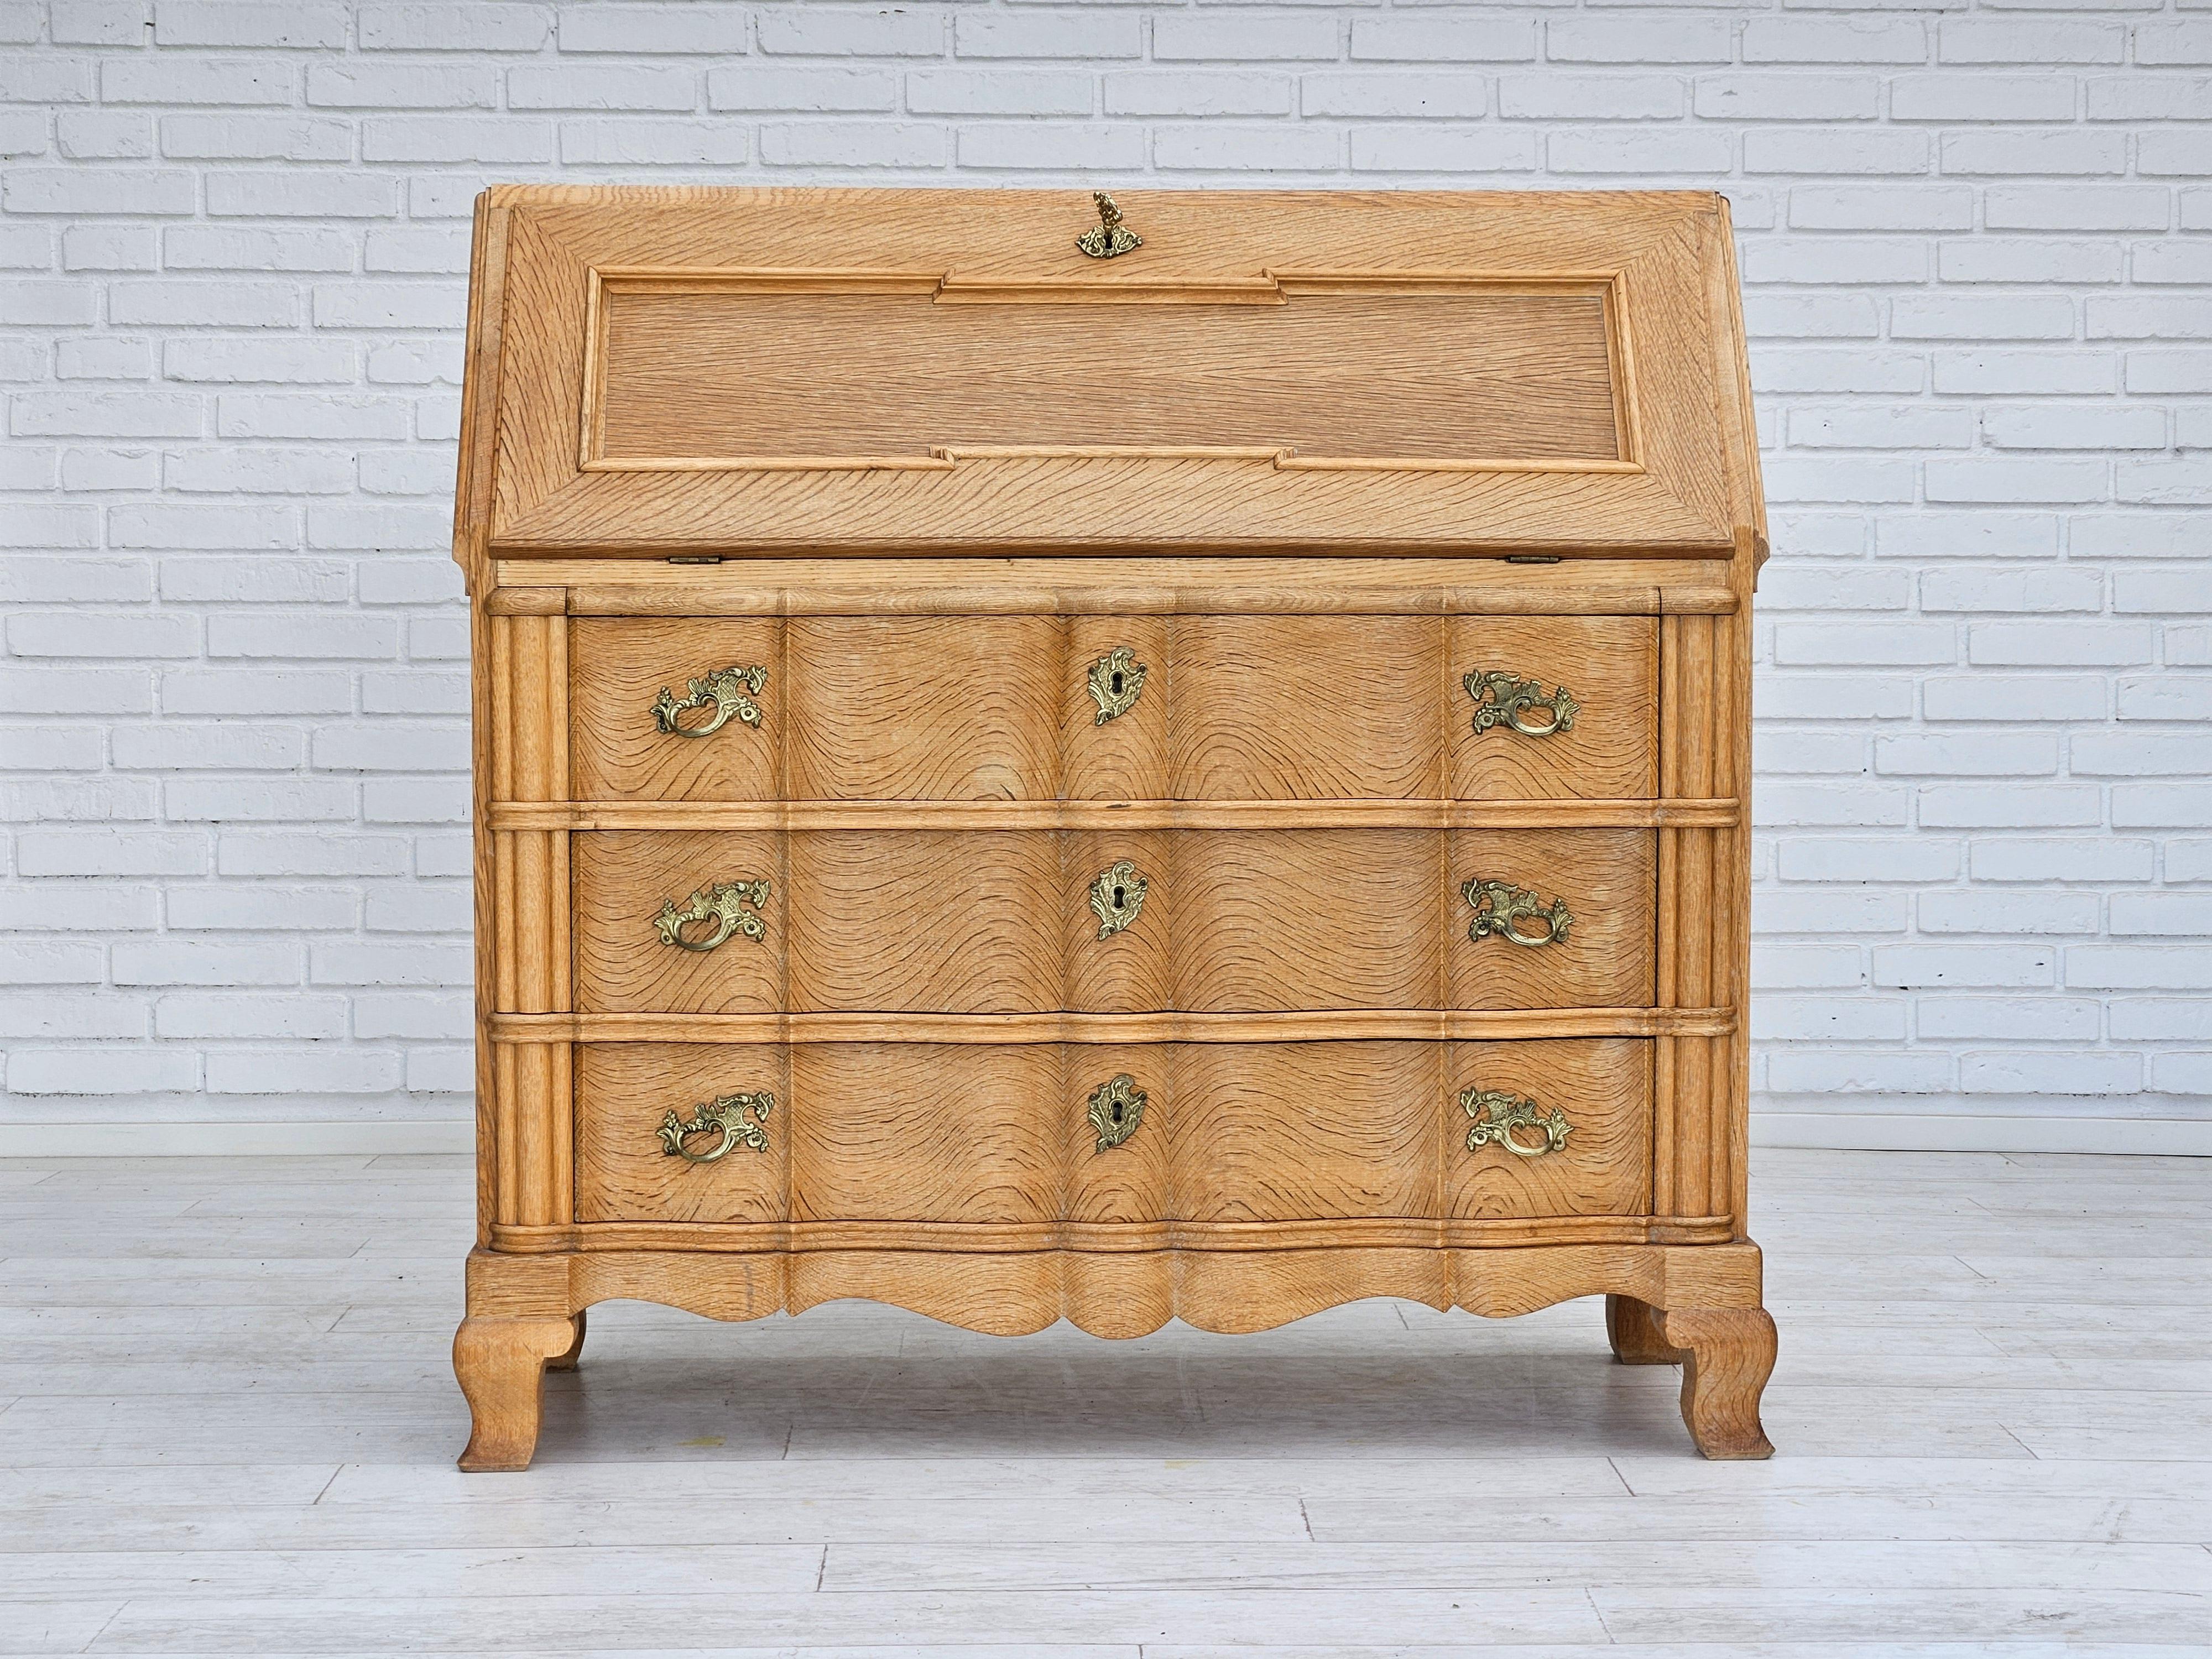 1970s, Danish chest of drawers in oak wood. Original very good condition. Manufactured by Danish furniture manufacturer in about 1970s.